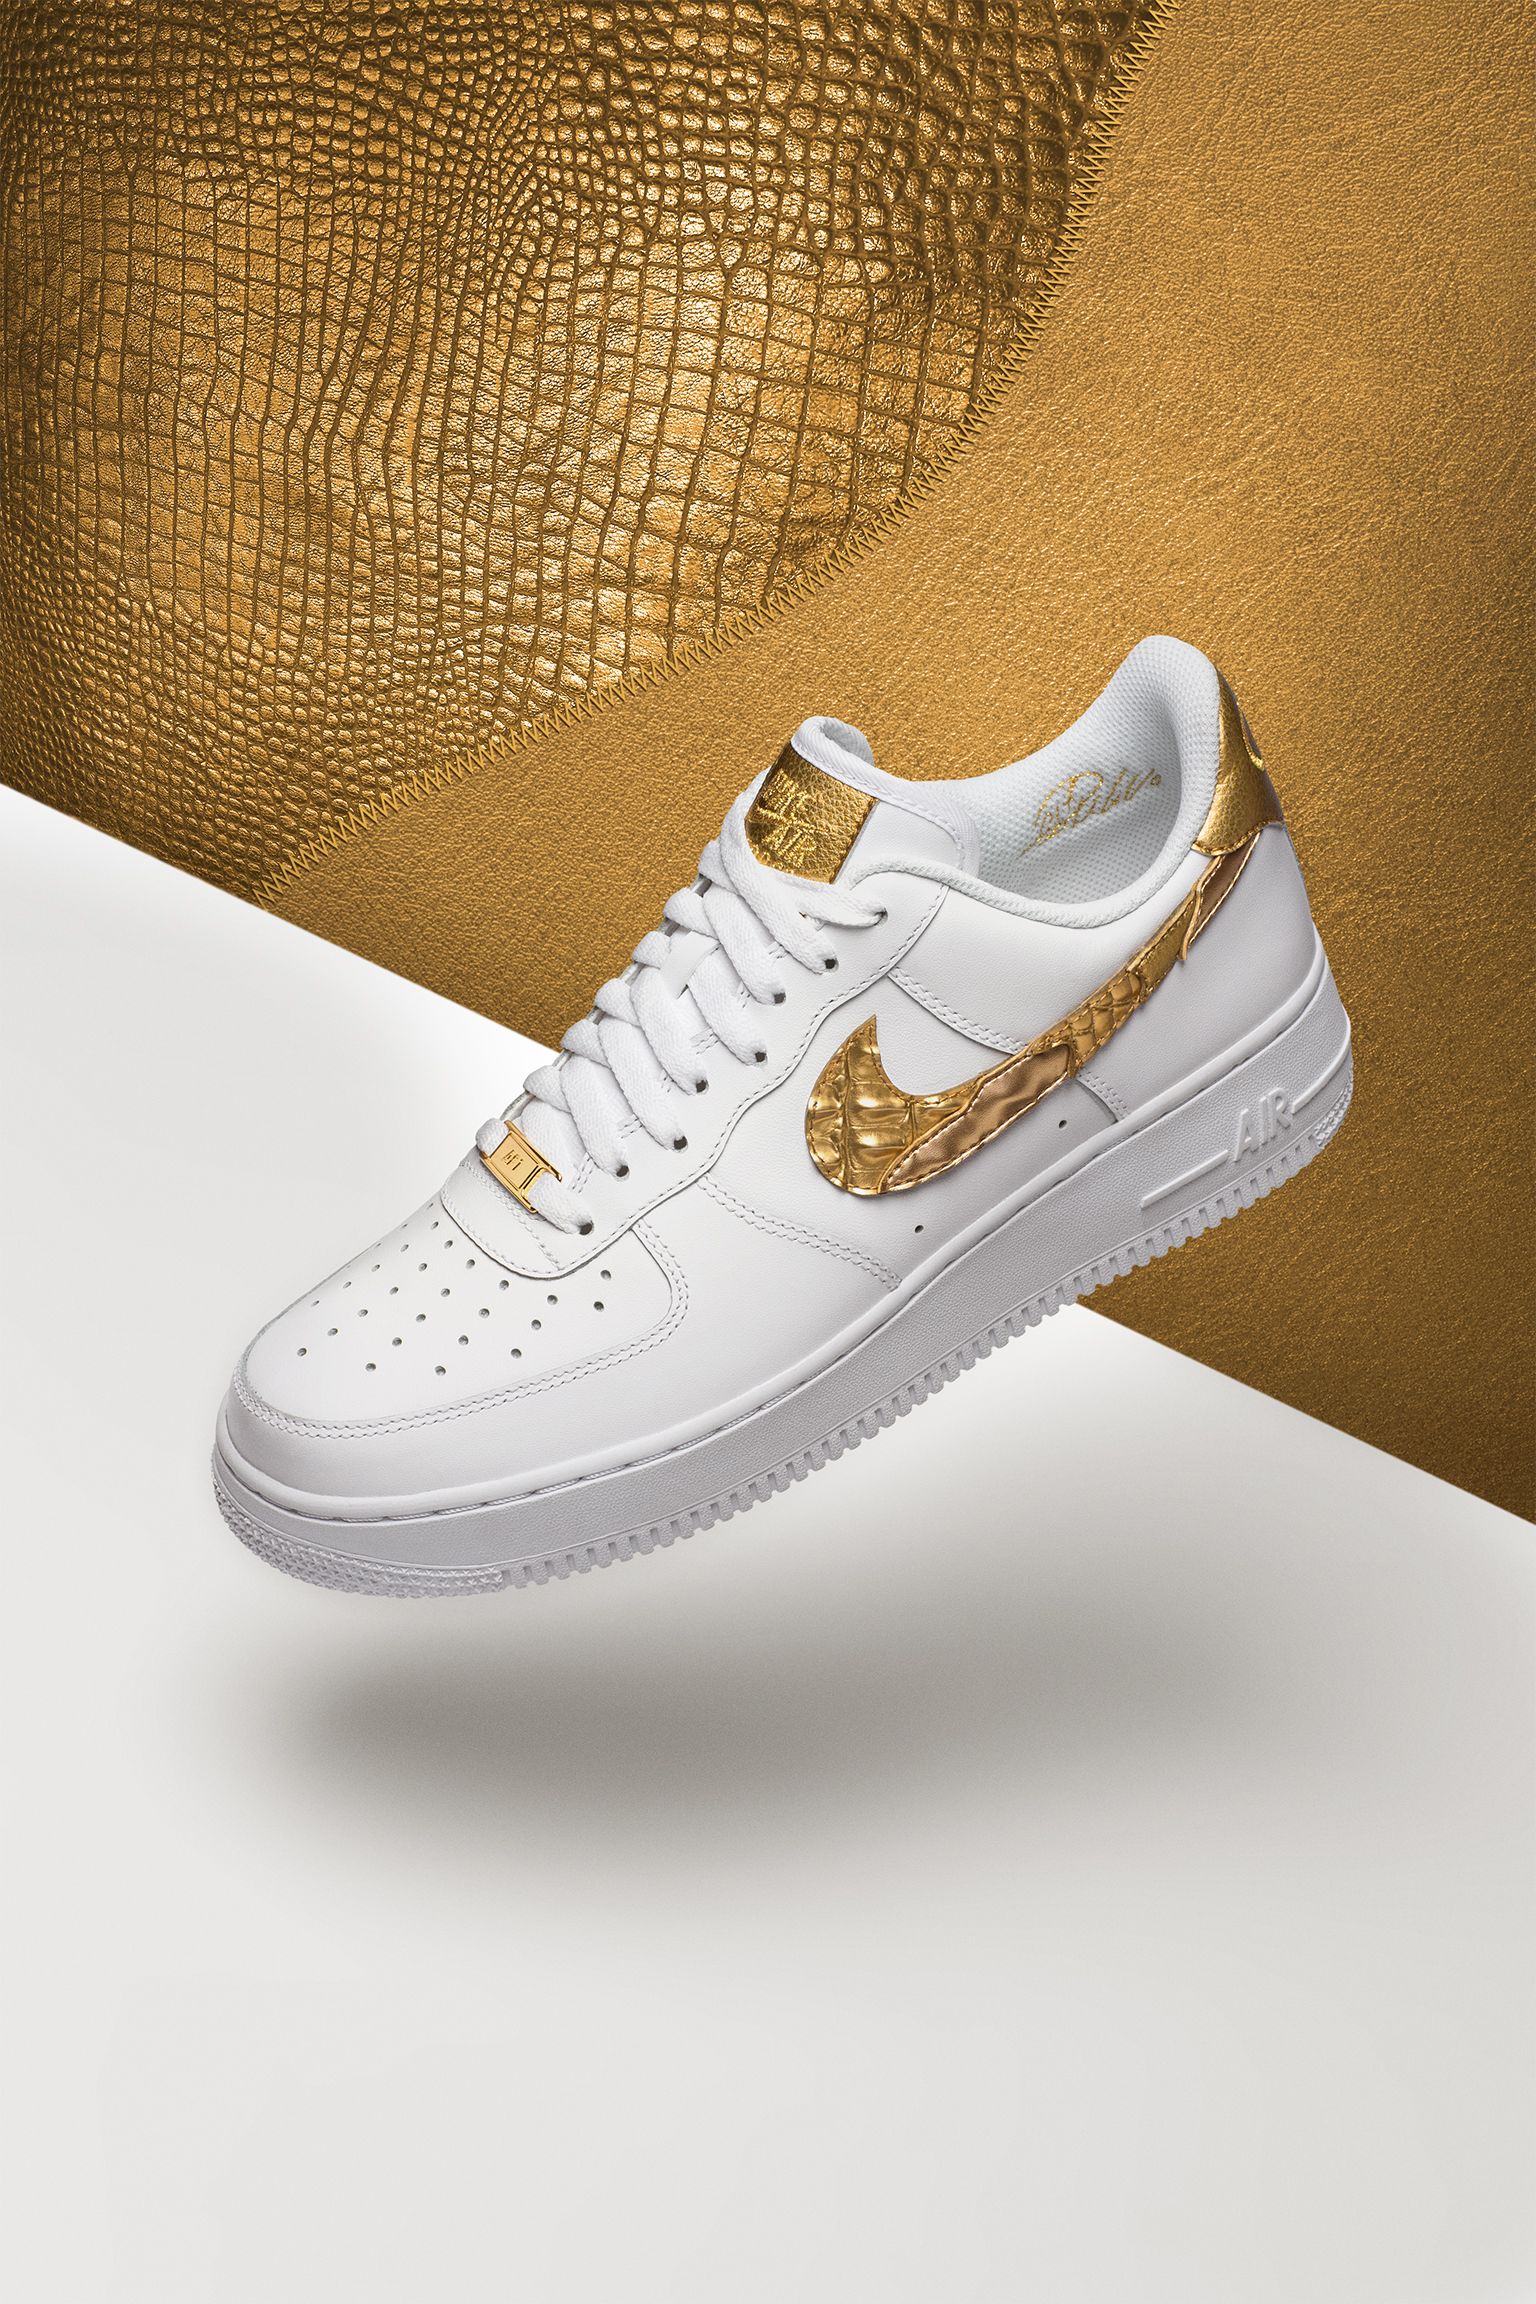 Rainbow Whirlpool Right Nike Air Force 1 CR7 'Golden Patchwork' Release Date. Nike SNKRS